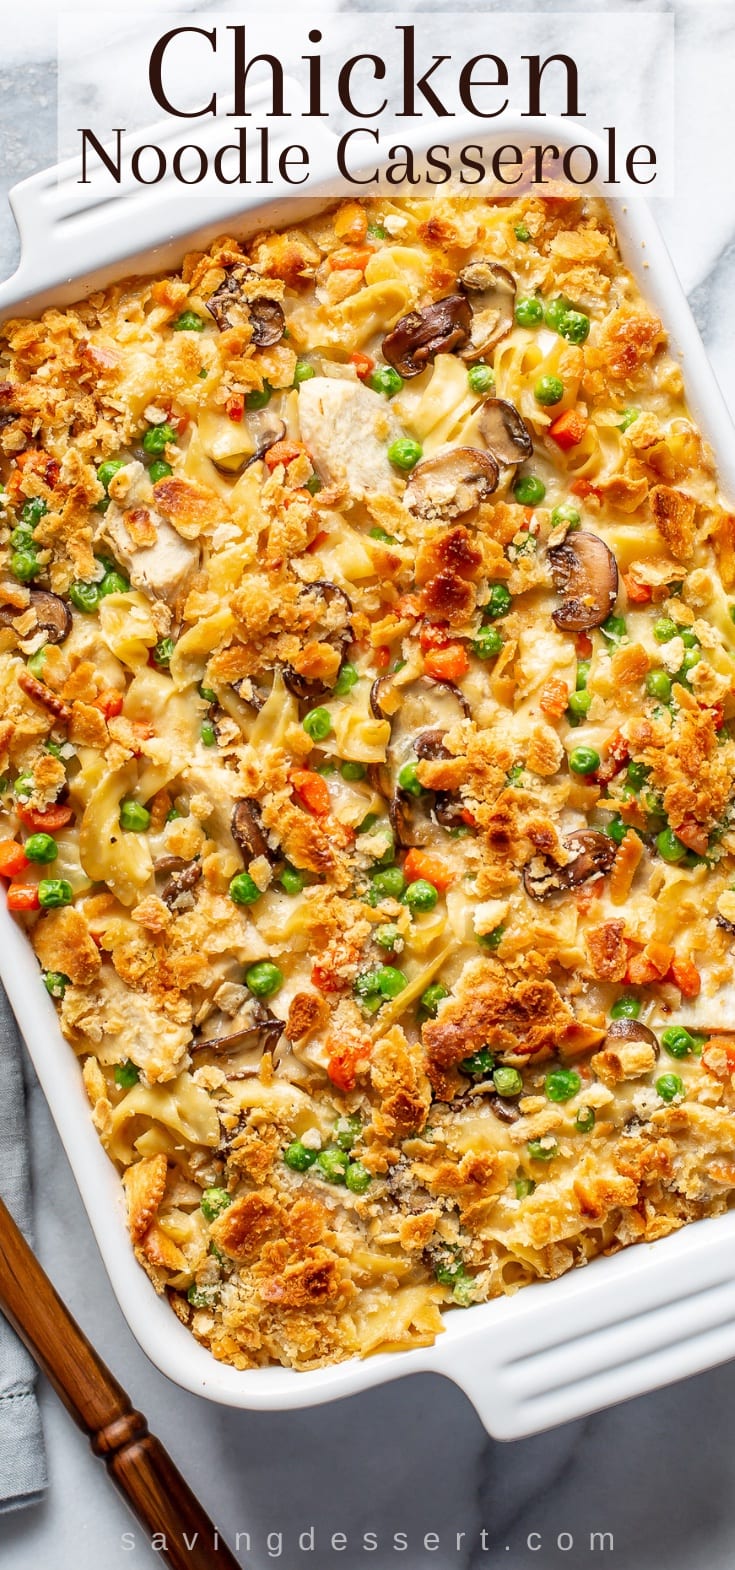 A casserole filled with golden brown Chicken Noodle Casserole